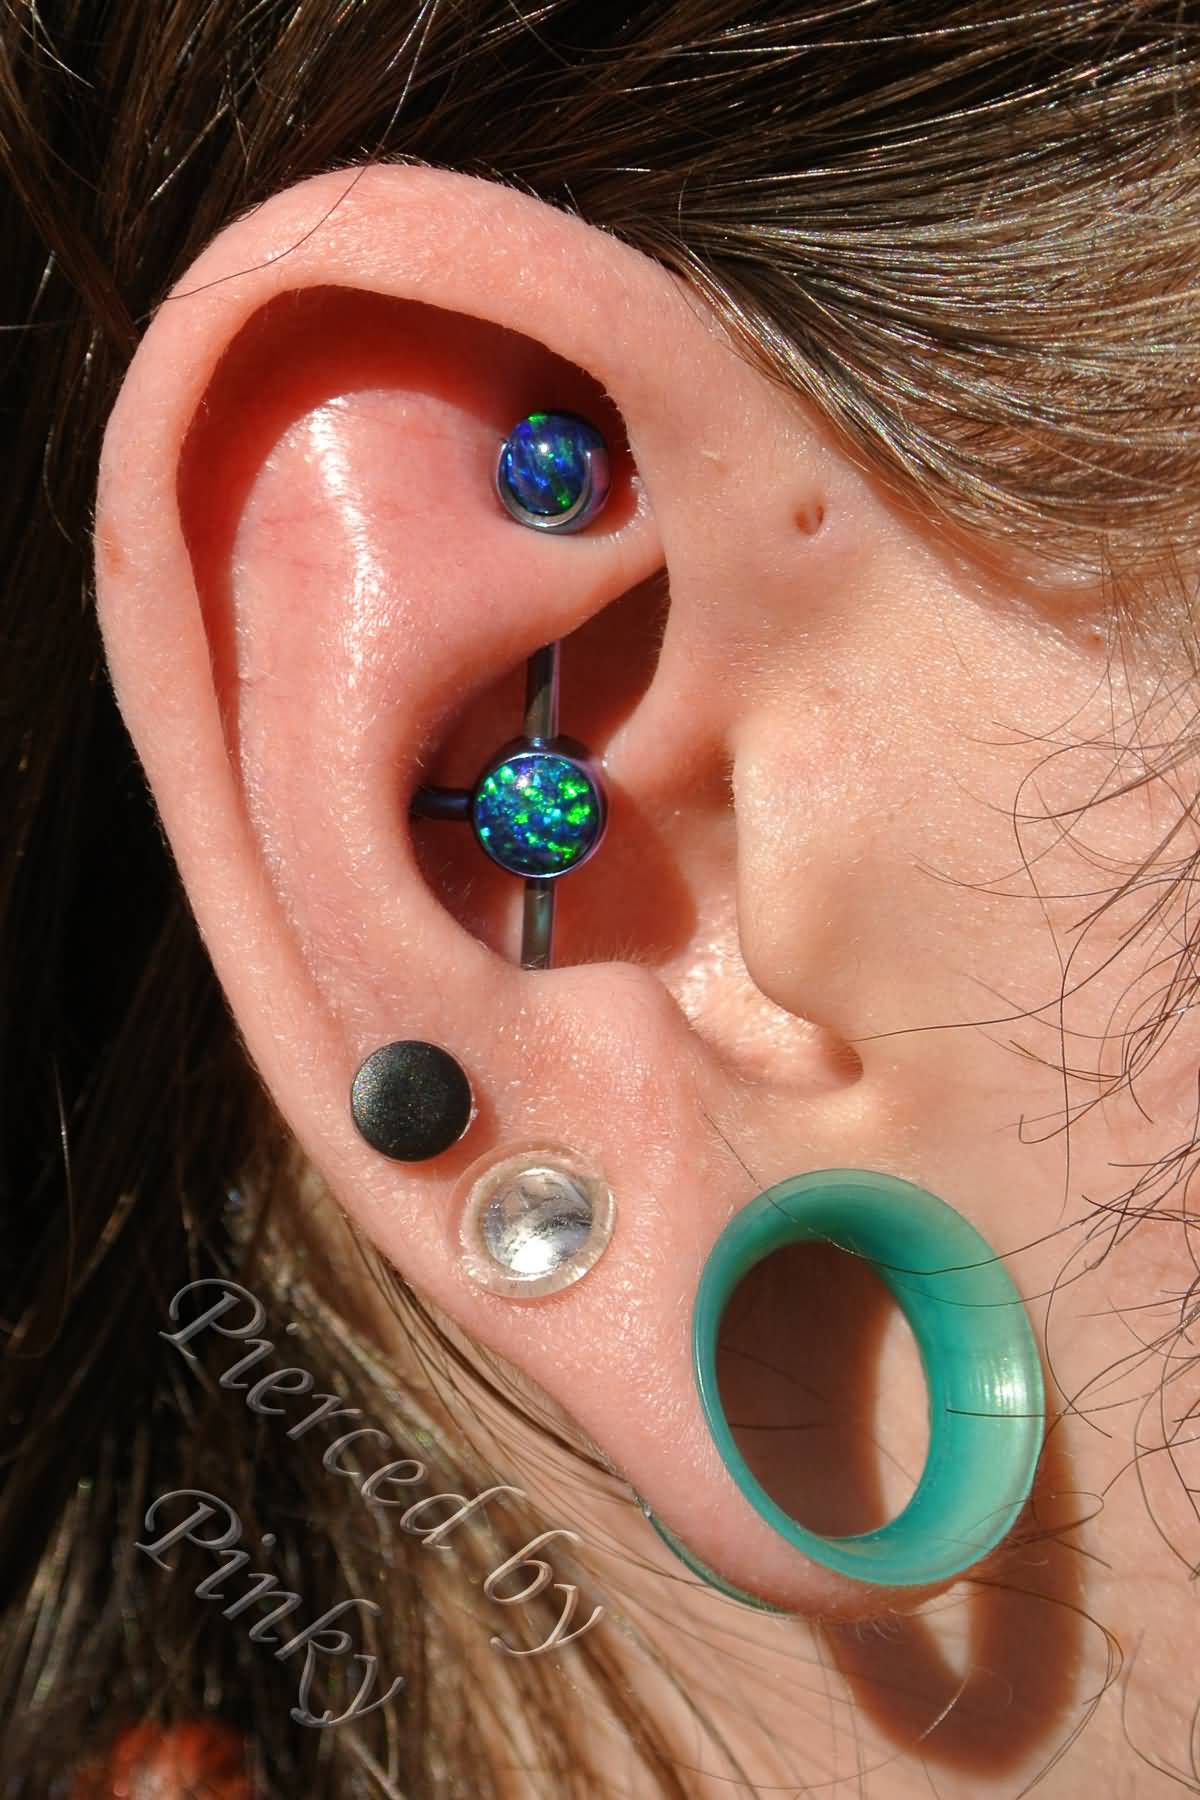 Ear Project Piercing Picture For Girls